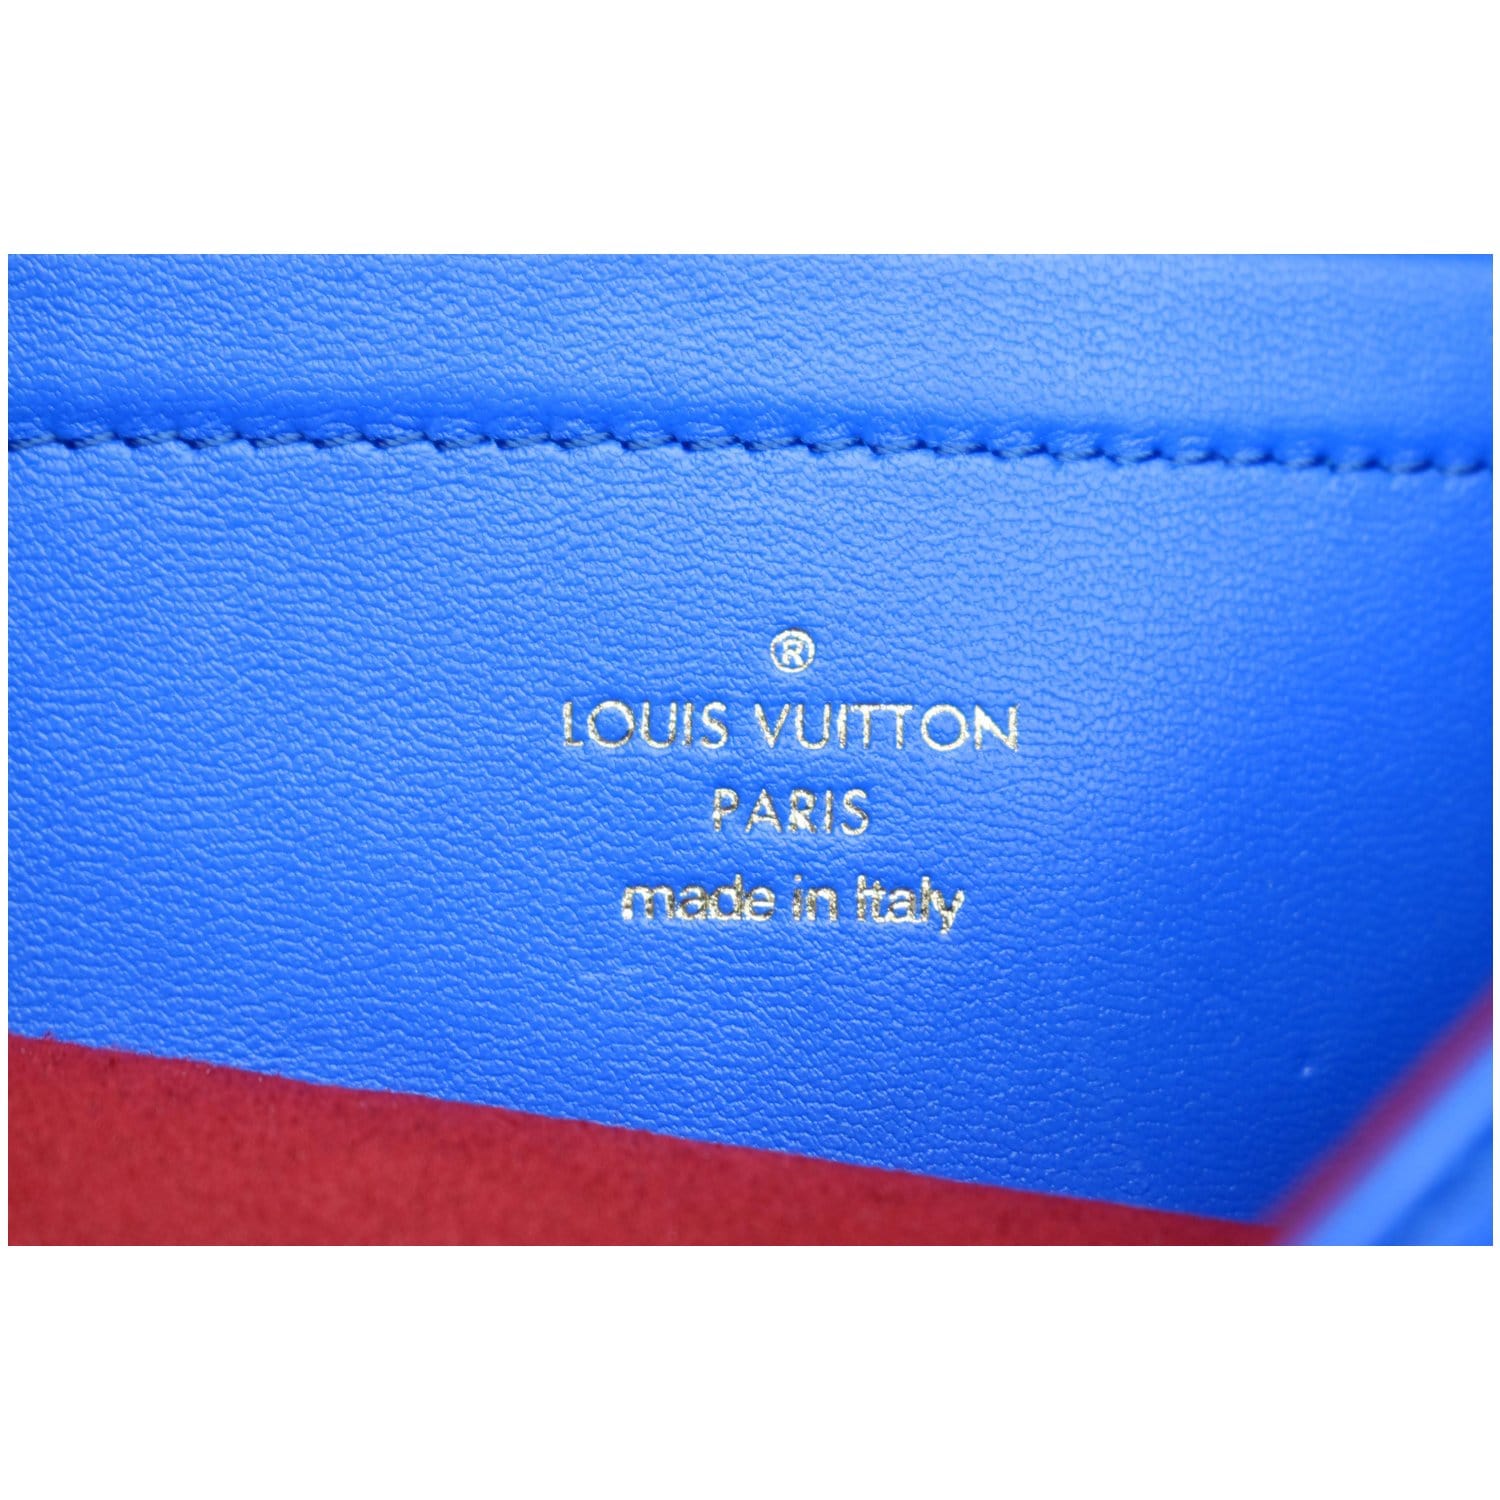 Anatomy of the Louis Vuitton Monogram Coussin - Academy by